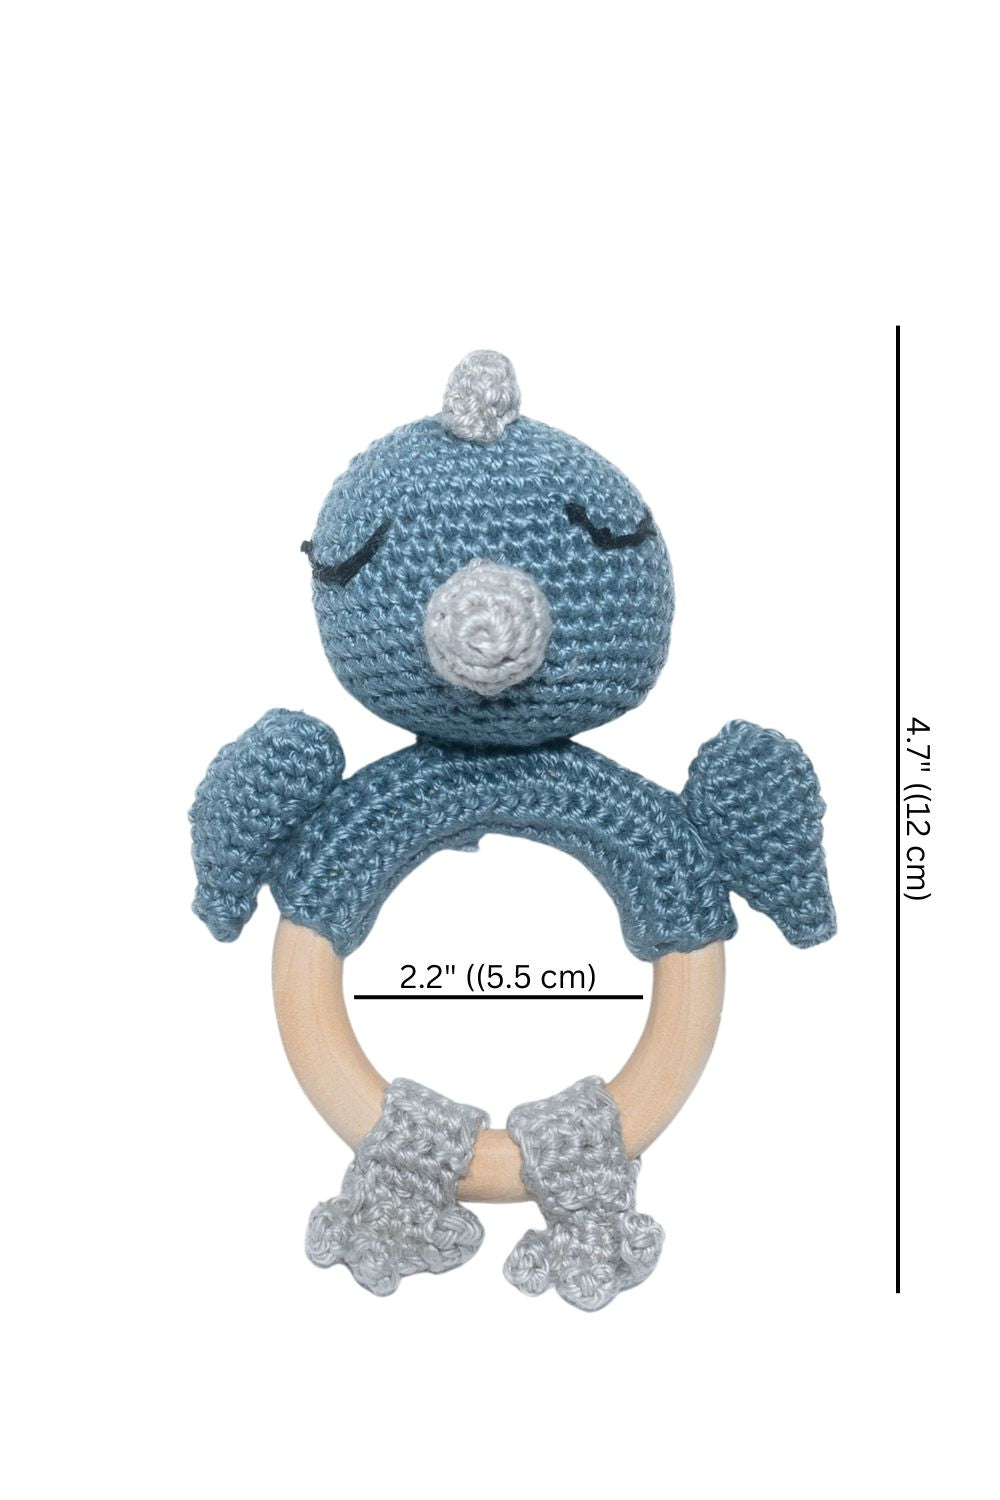 Cute crochet baby toys. Perfect gifts for new borns. Hand made gifts for babies.